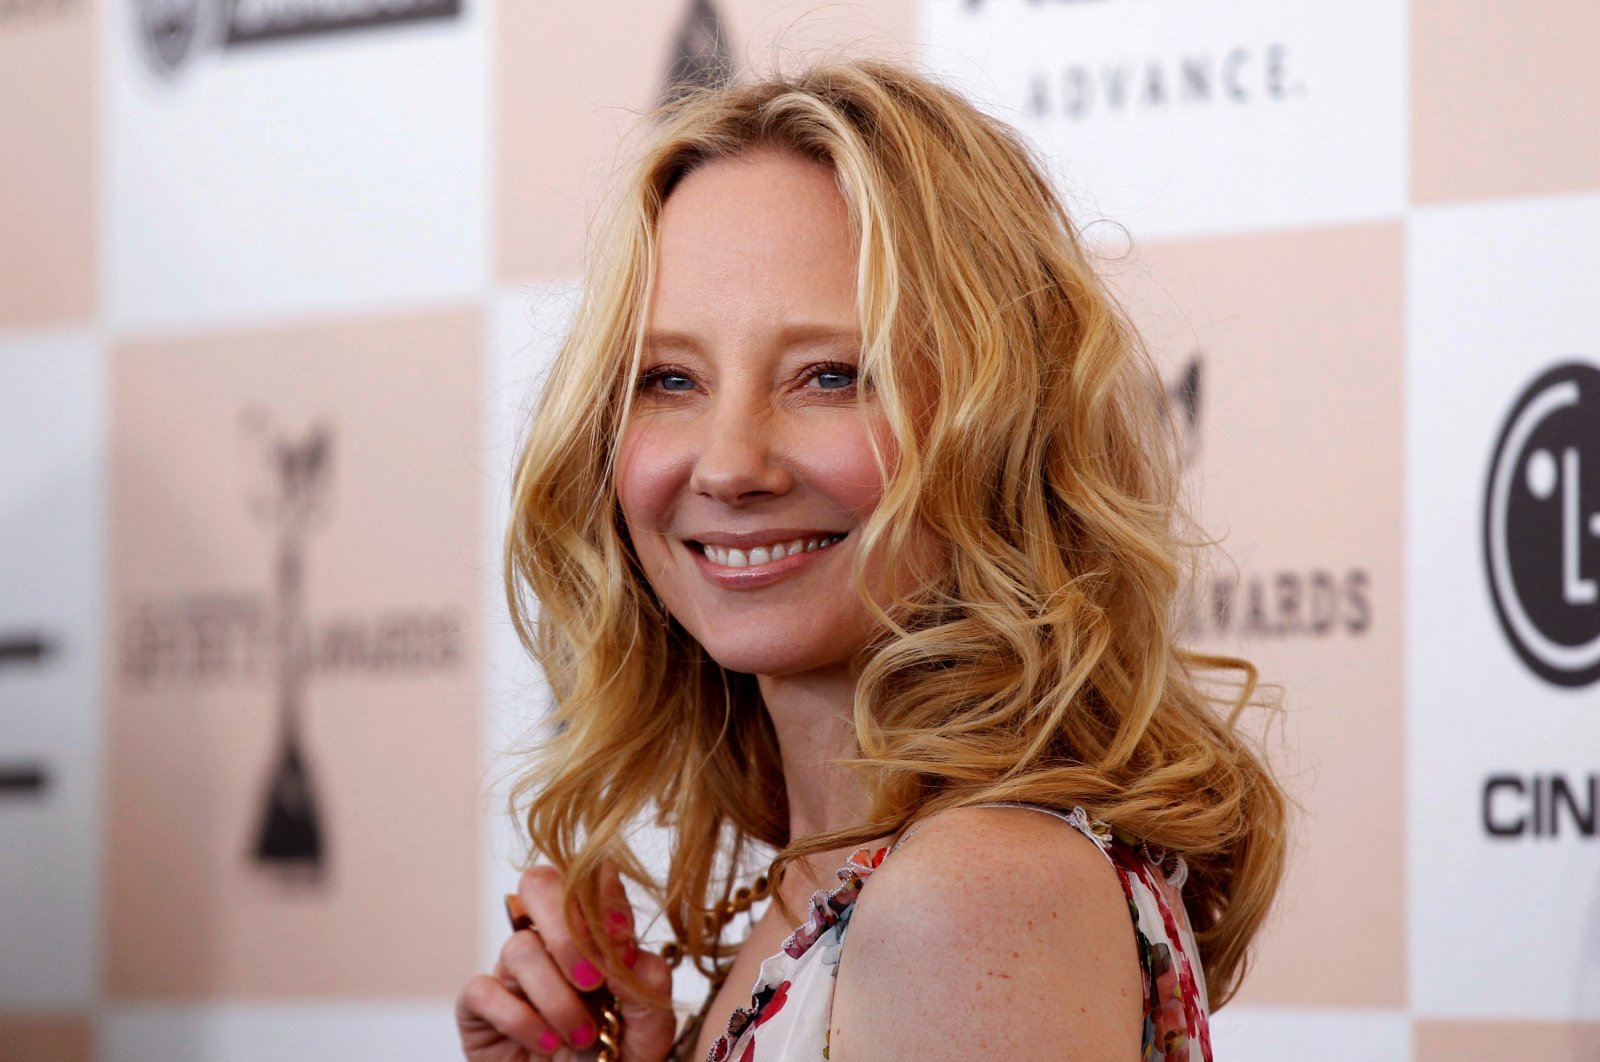 Actress Anne Heche arrives at the 2011 Film Independent Spirit Awards in Santa Monica, California February 26, 2011. (REUTERS)